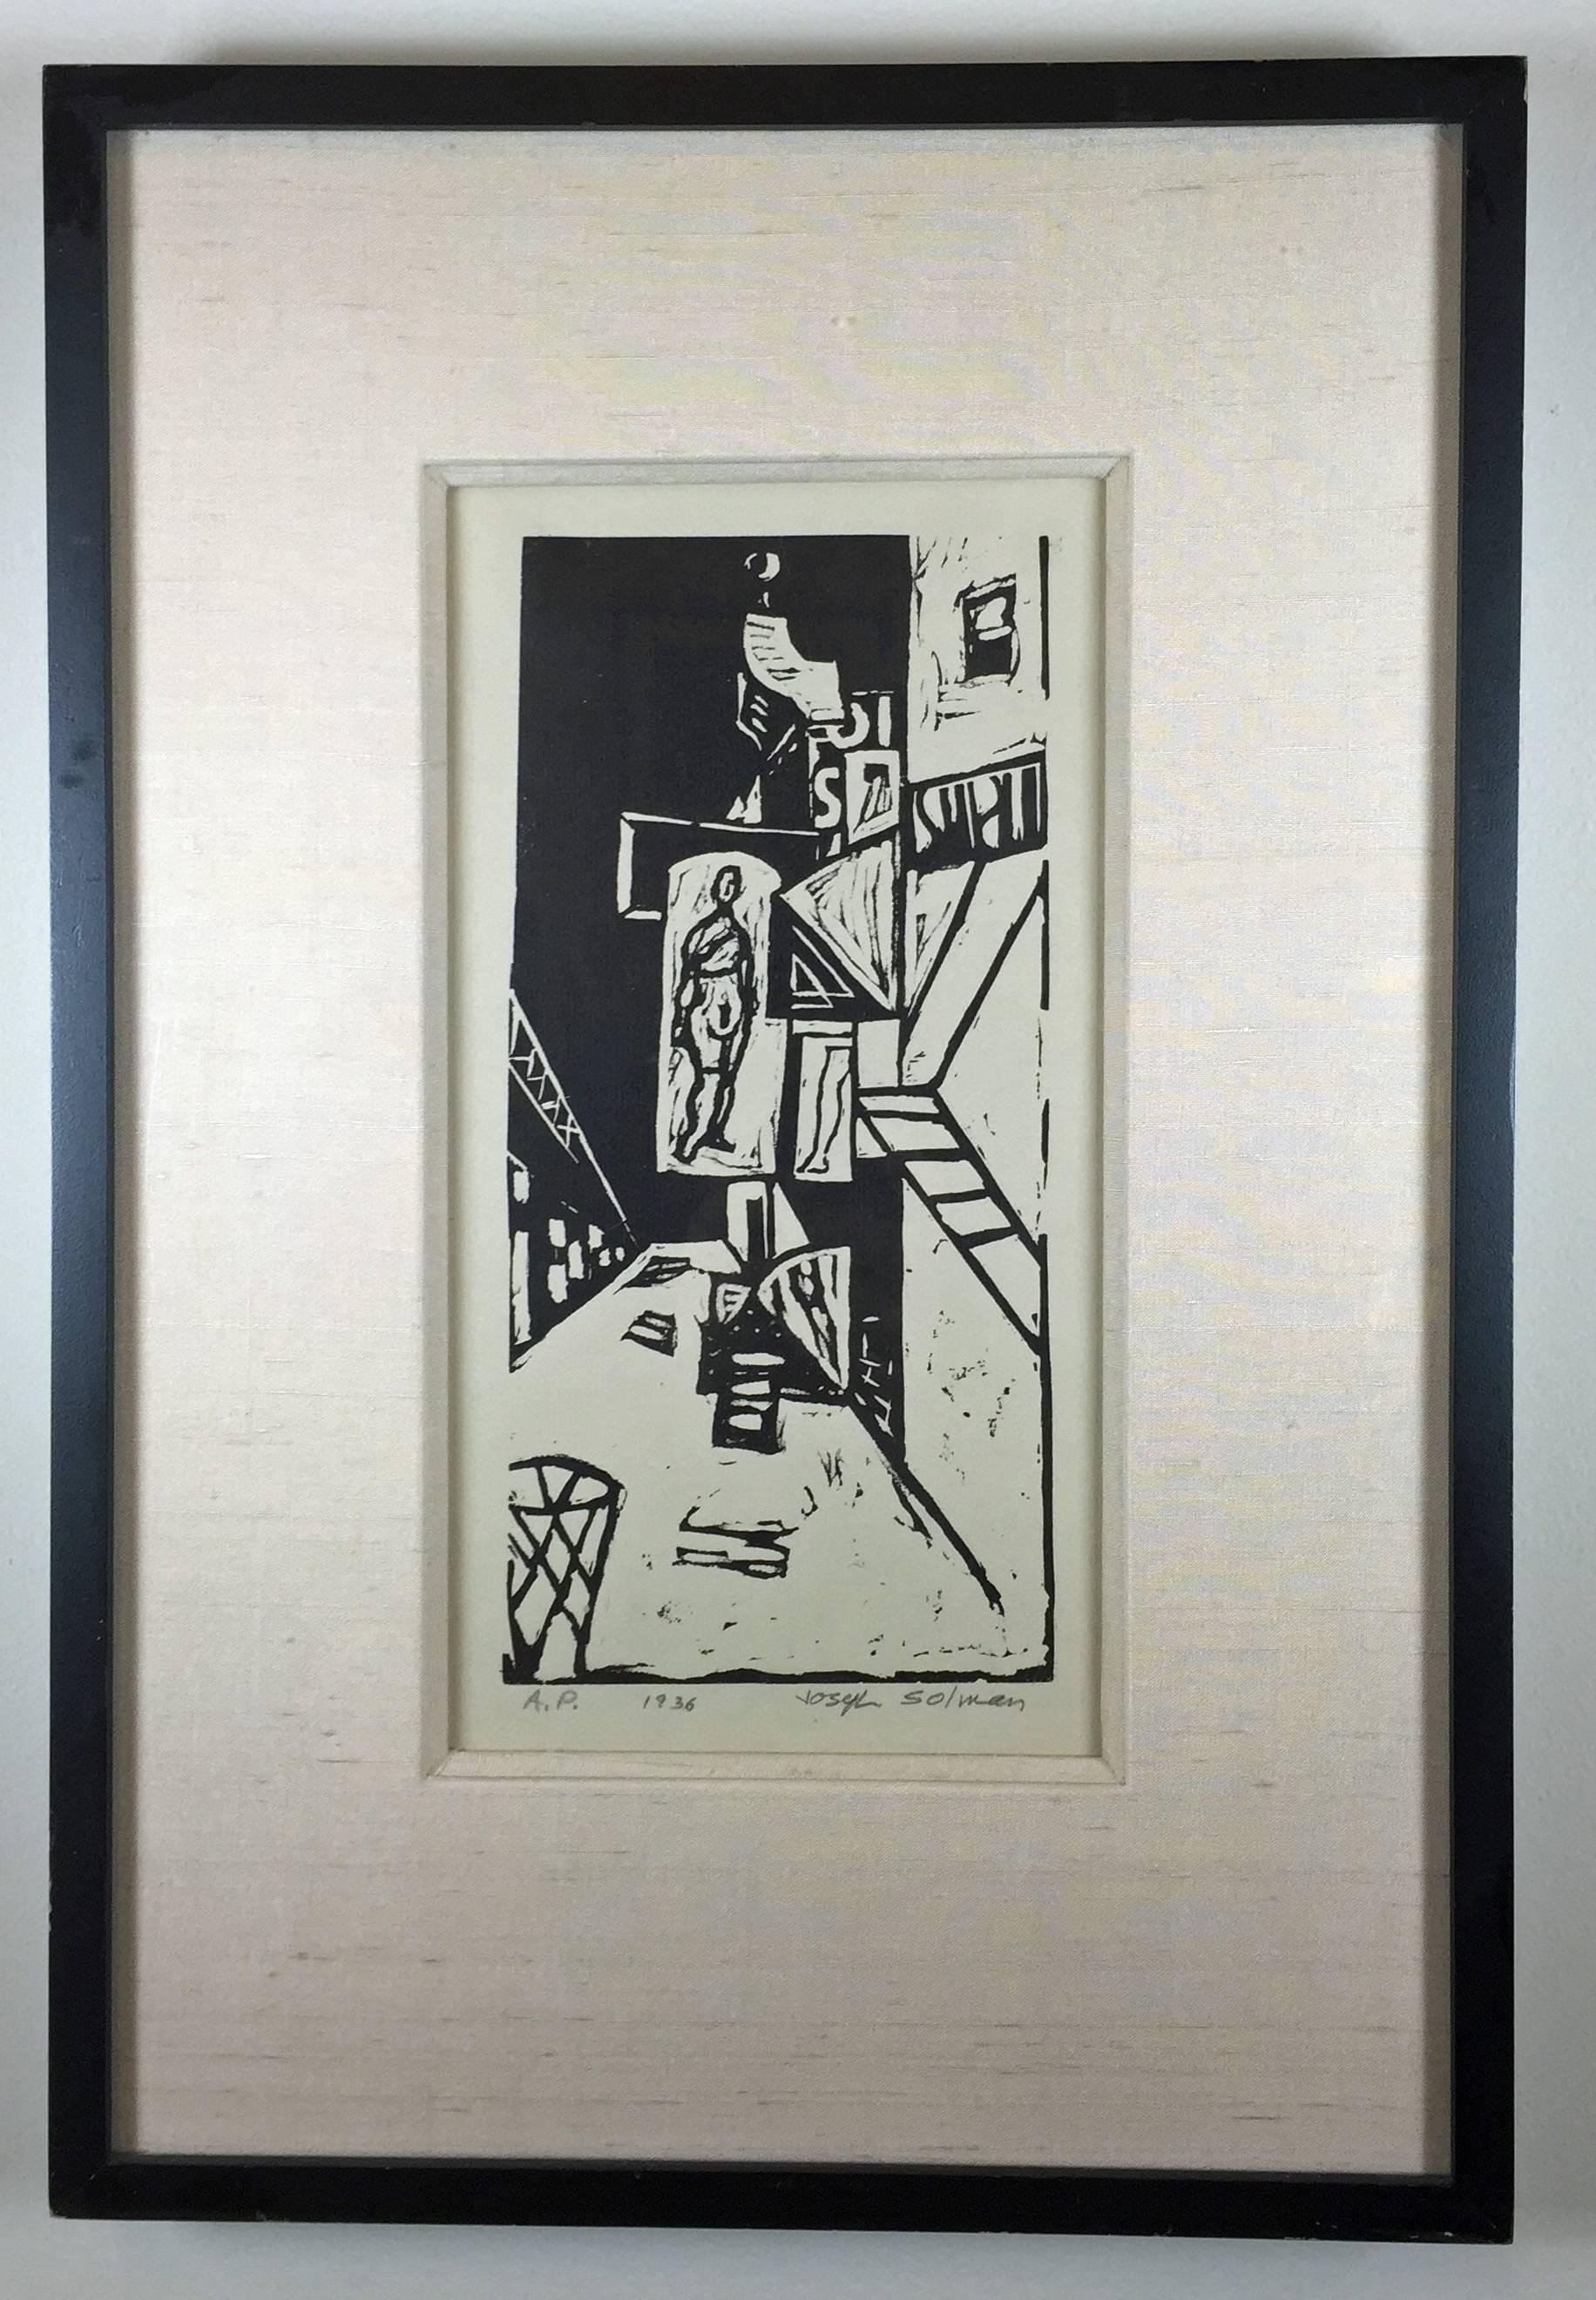 Solman, Joseph.  VENUS OF 23RD STREET. Linocut, 1936. Artist's Proof
(edition size, if any, not known). Inscribed 